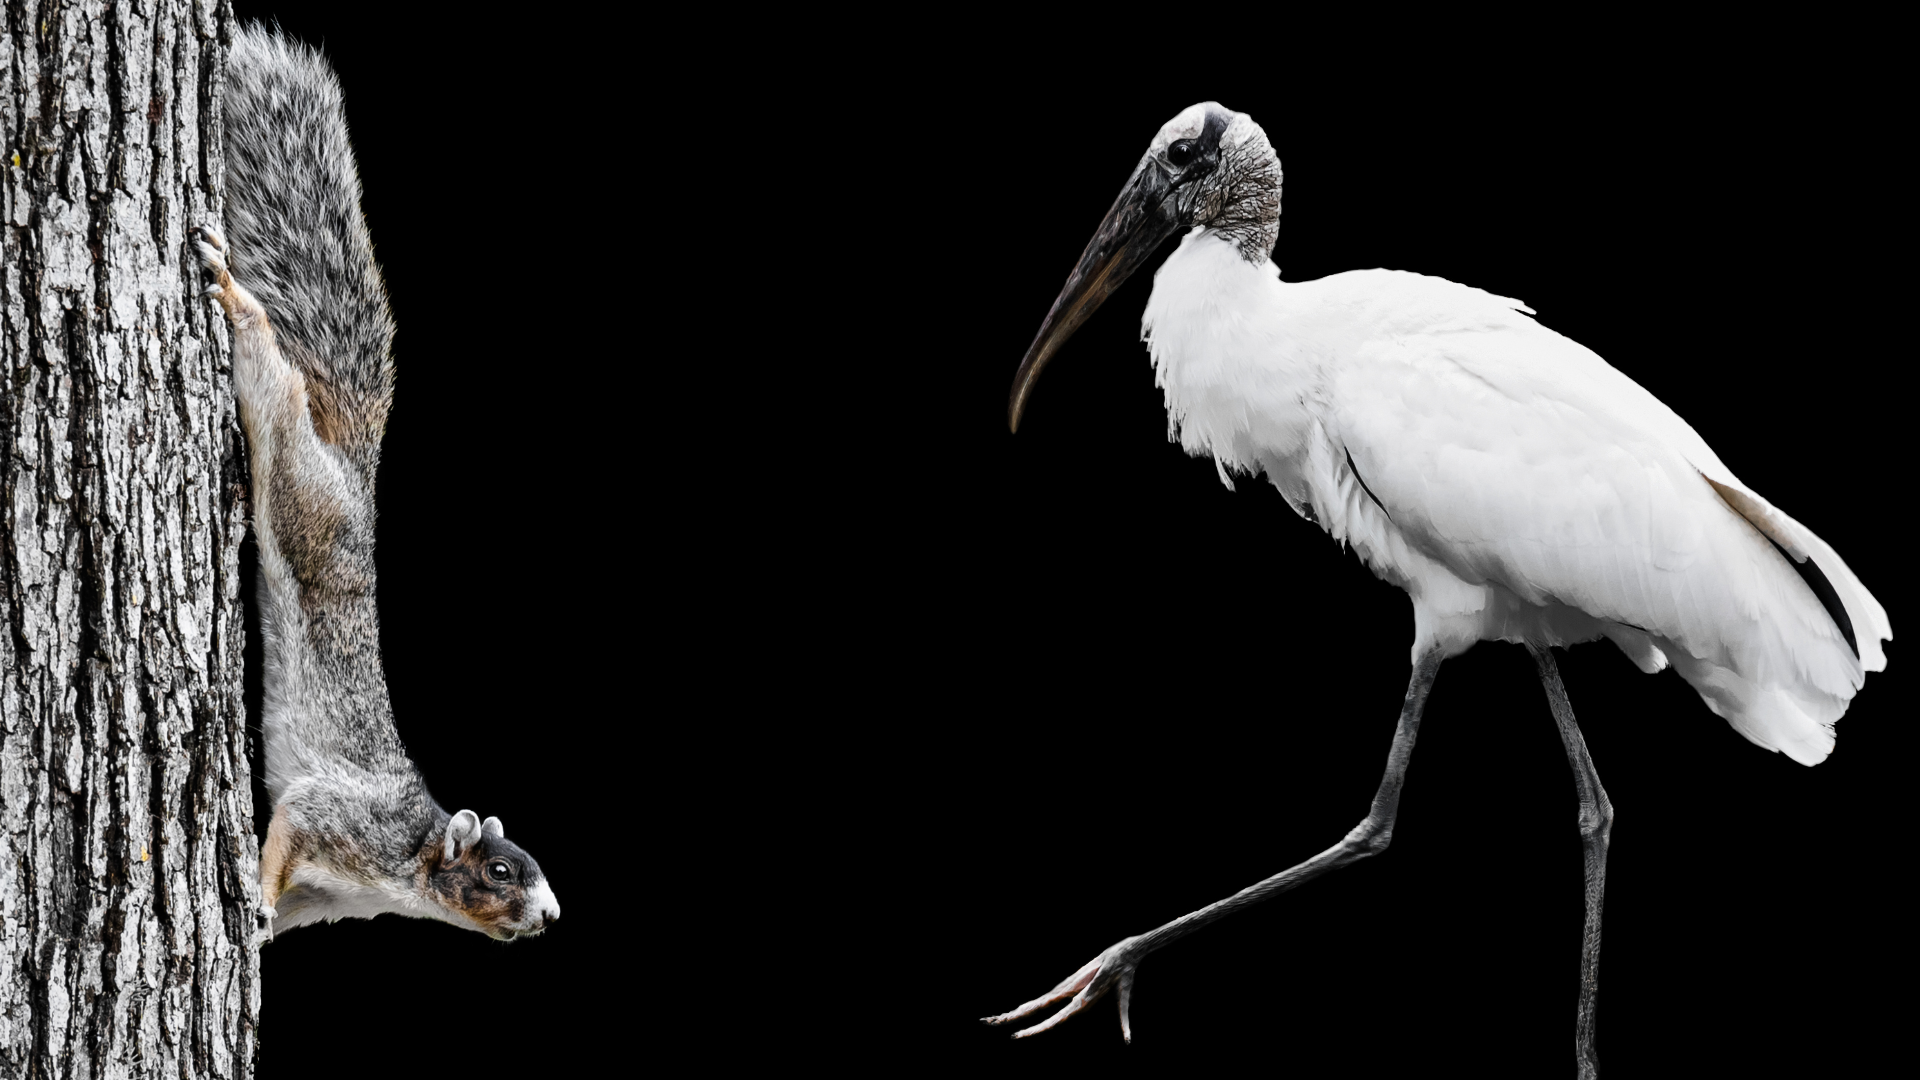 A Fox Squirrel and Walking Wood Stork on Black Background Fine Art Portrait Animal Photography